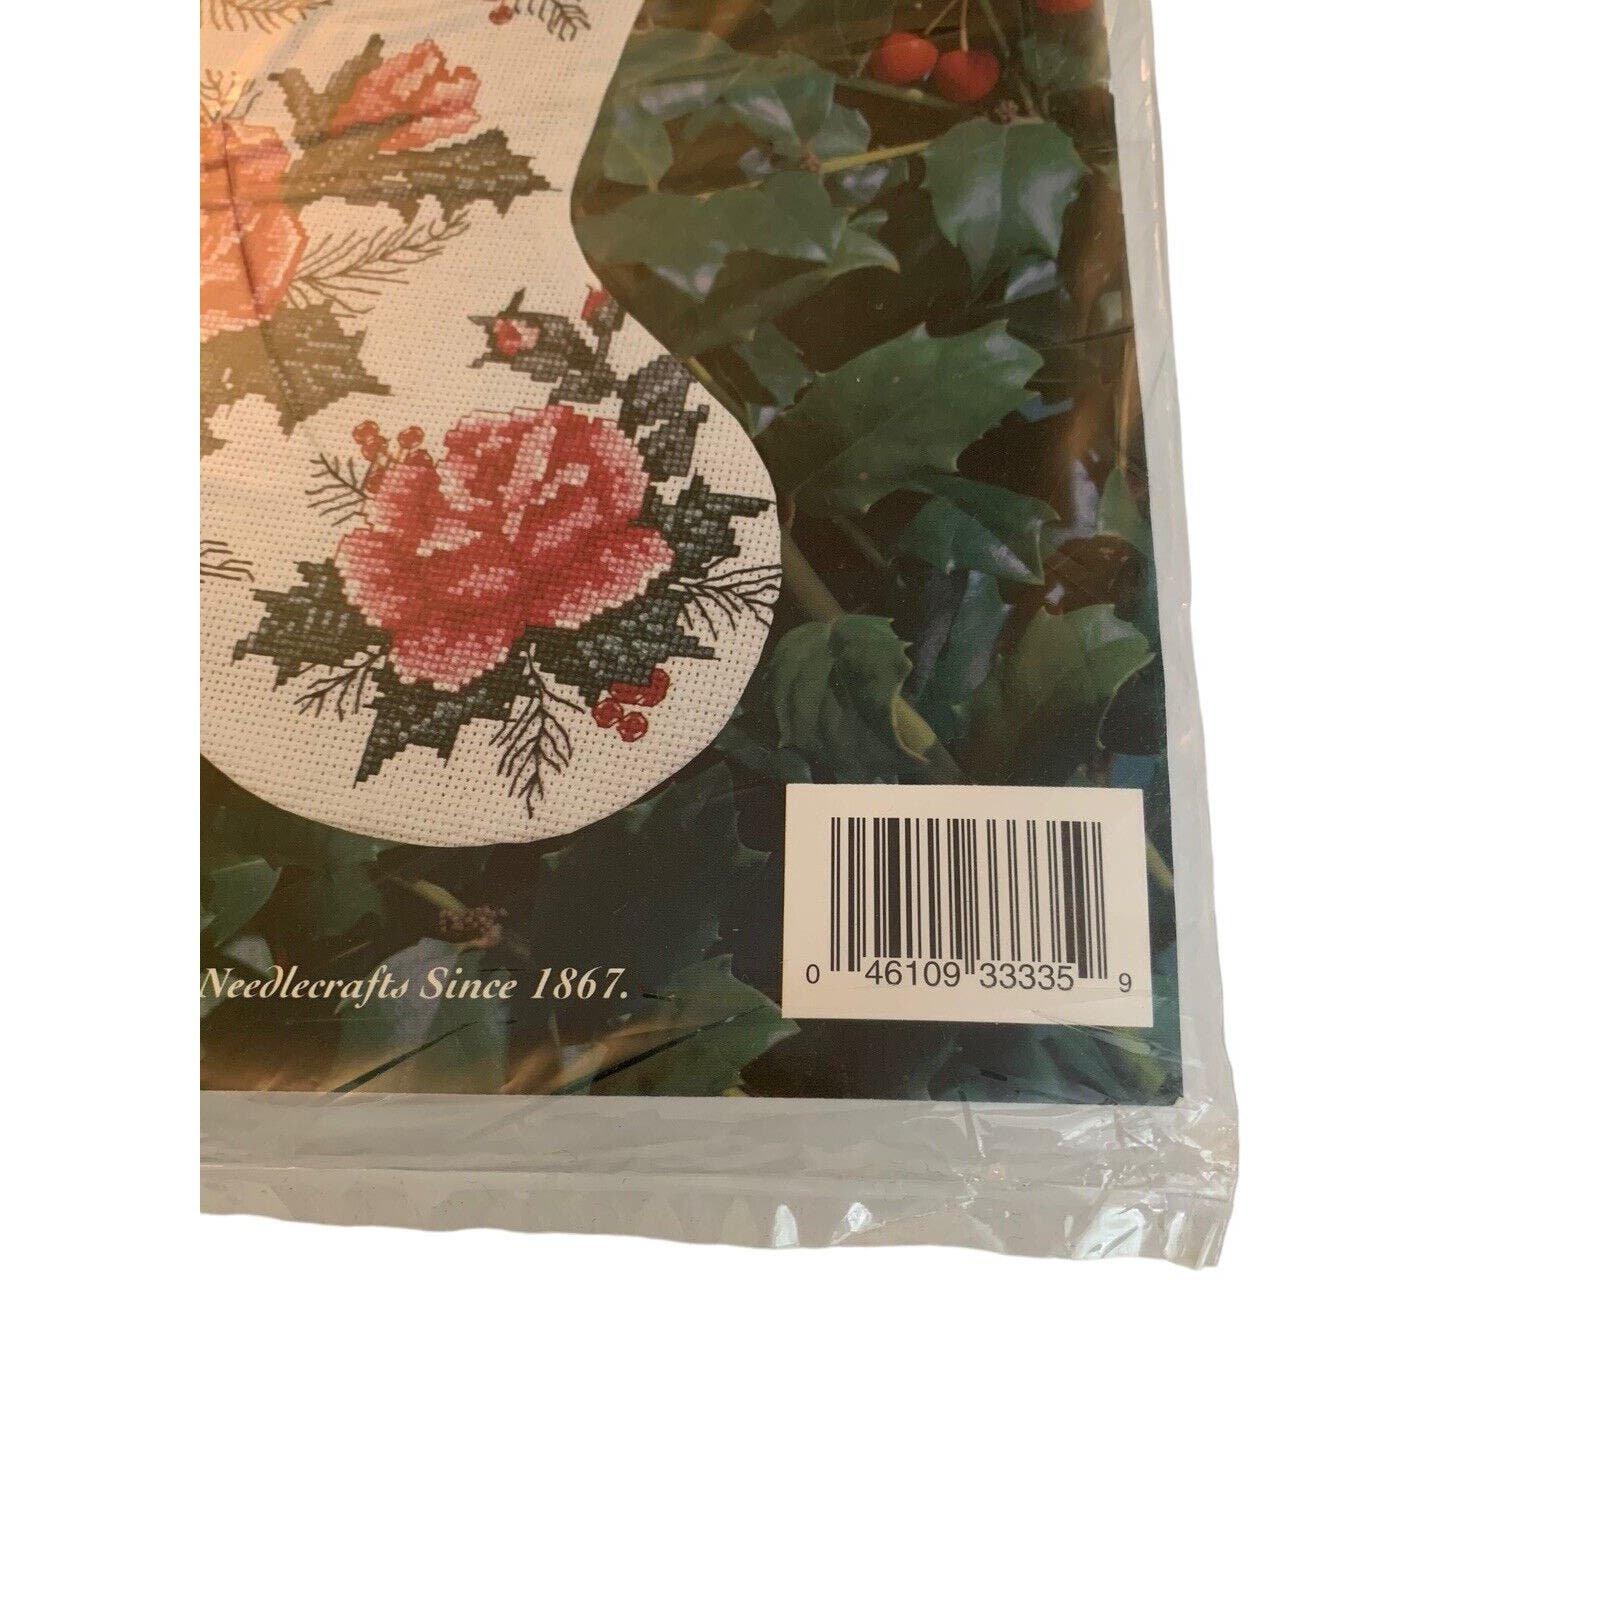 Bucilla Christmas Roses 16 Inch Stocking Cross Stitch Kit Holiday New #33335 5cGy7Cd2h